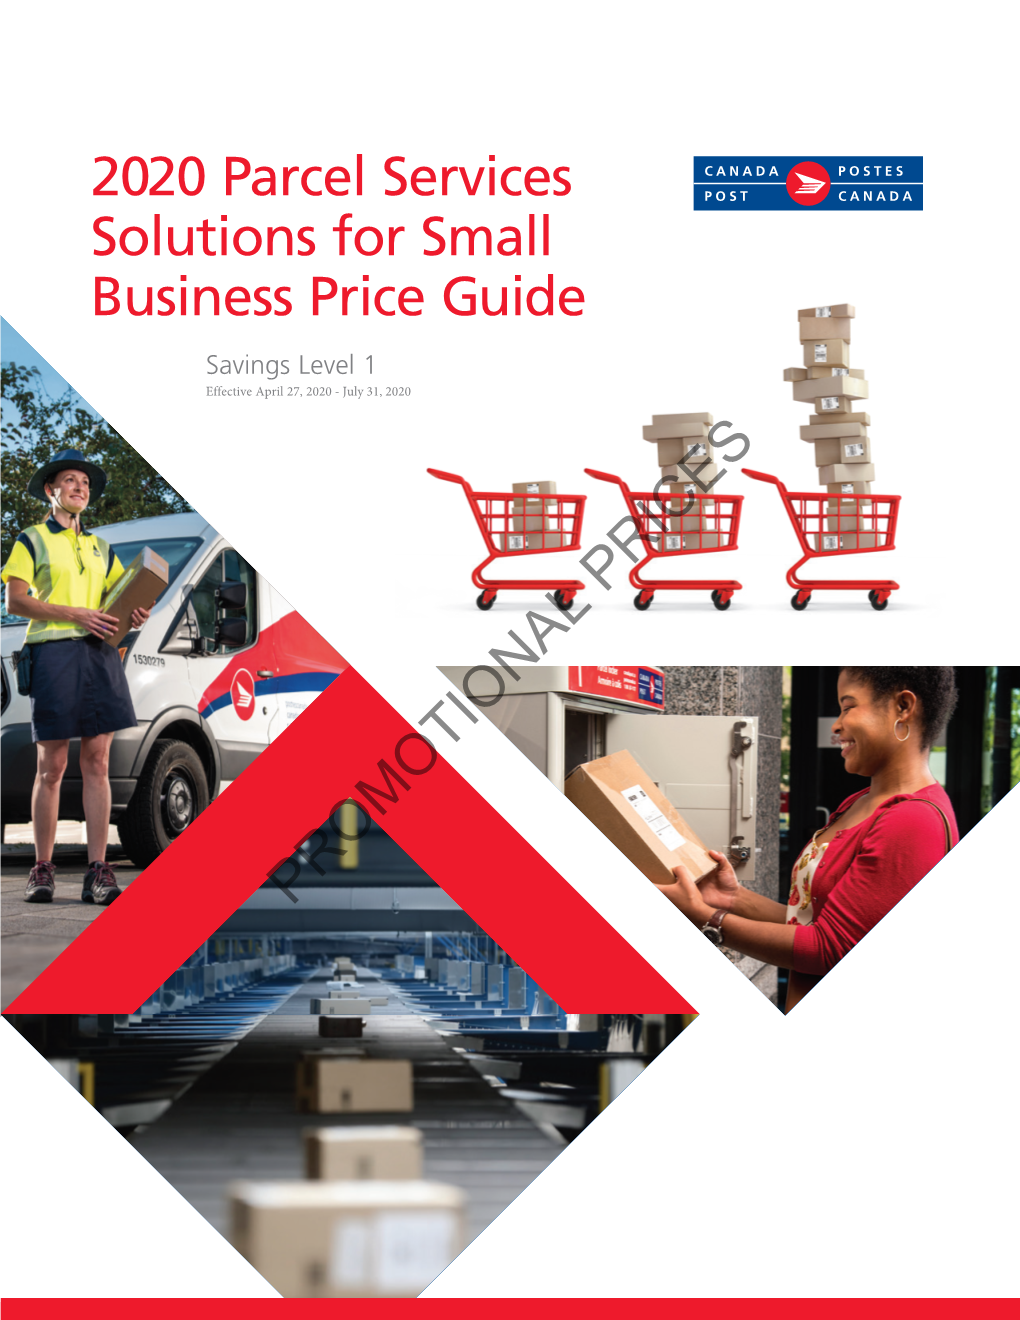 2020 Parcel Services Solutions for Small Business Price Guide Savings Level 1 Effective April 27, 2020 - July 31, 2020